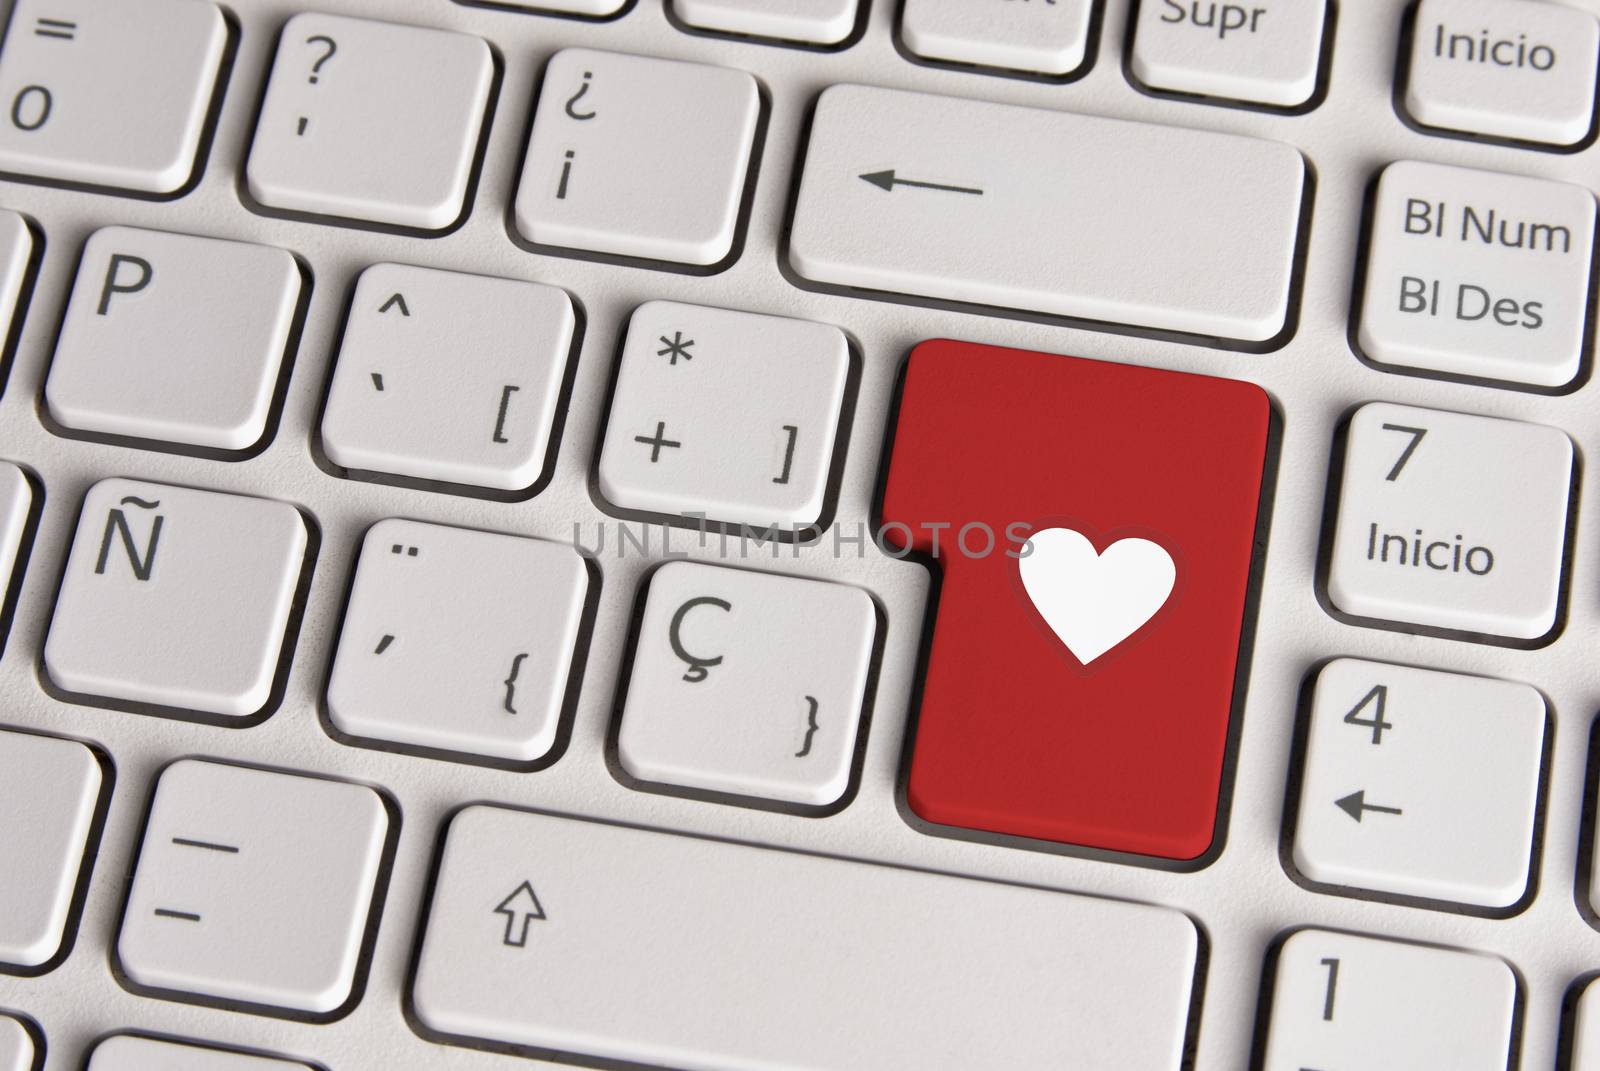 Spanish keyboard with love concept heart shape icon over red background button. Image with clipping path for easy change the key color and editing.